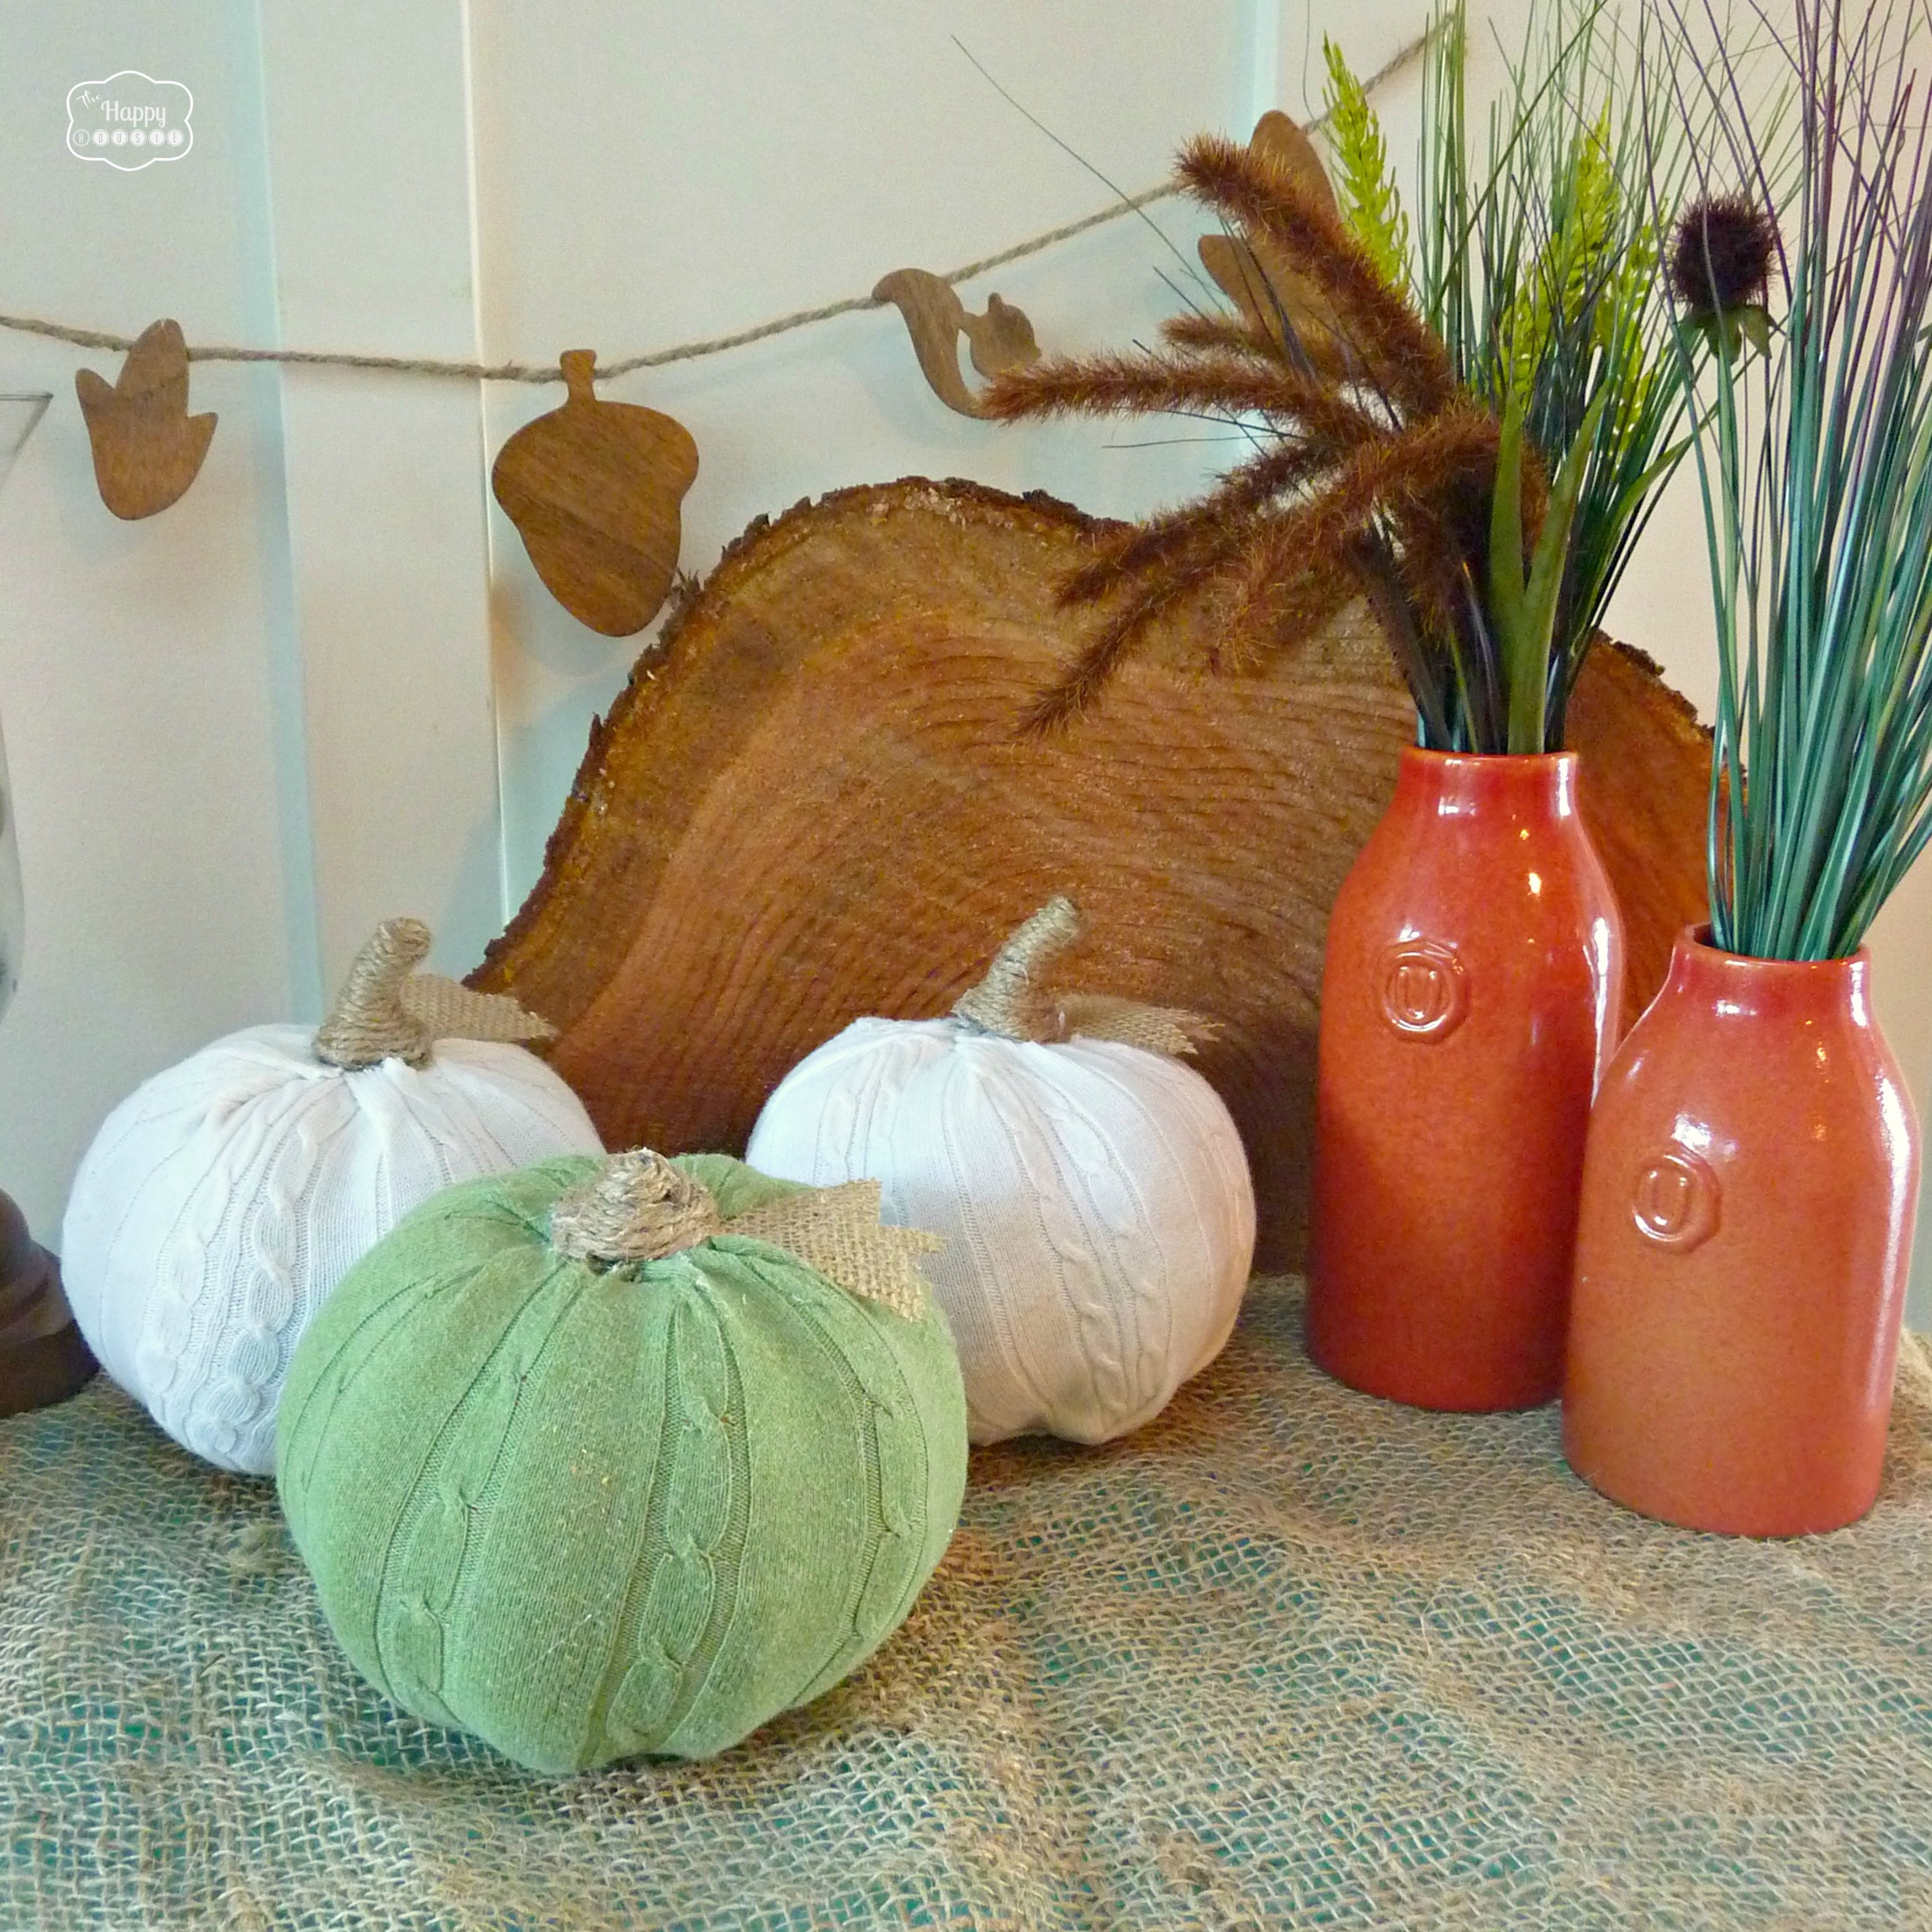 Easy DIY Sweater Pumpkins with twine stems and burlap leaves at thehappyhousie